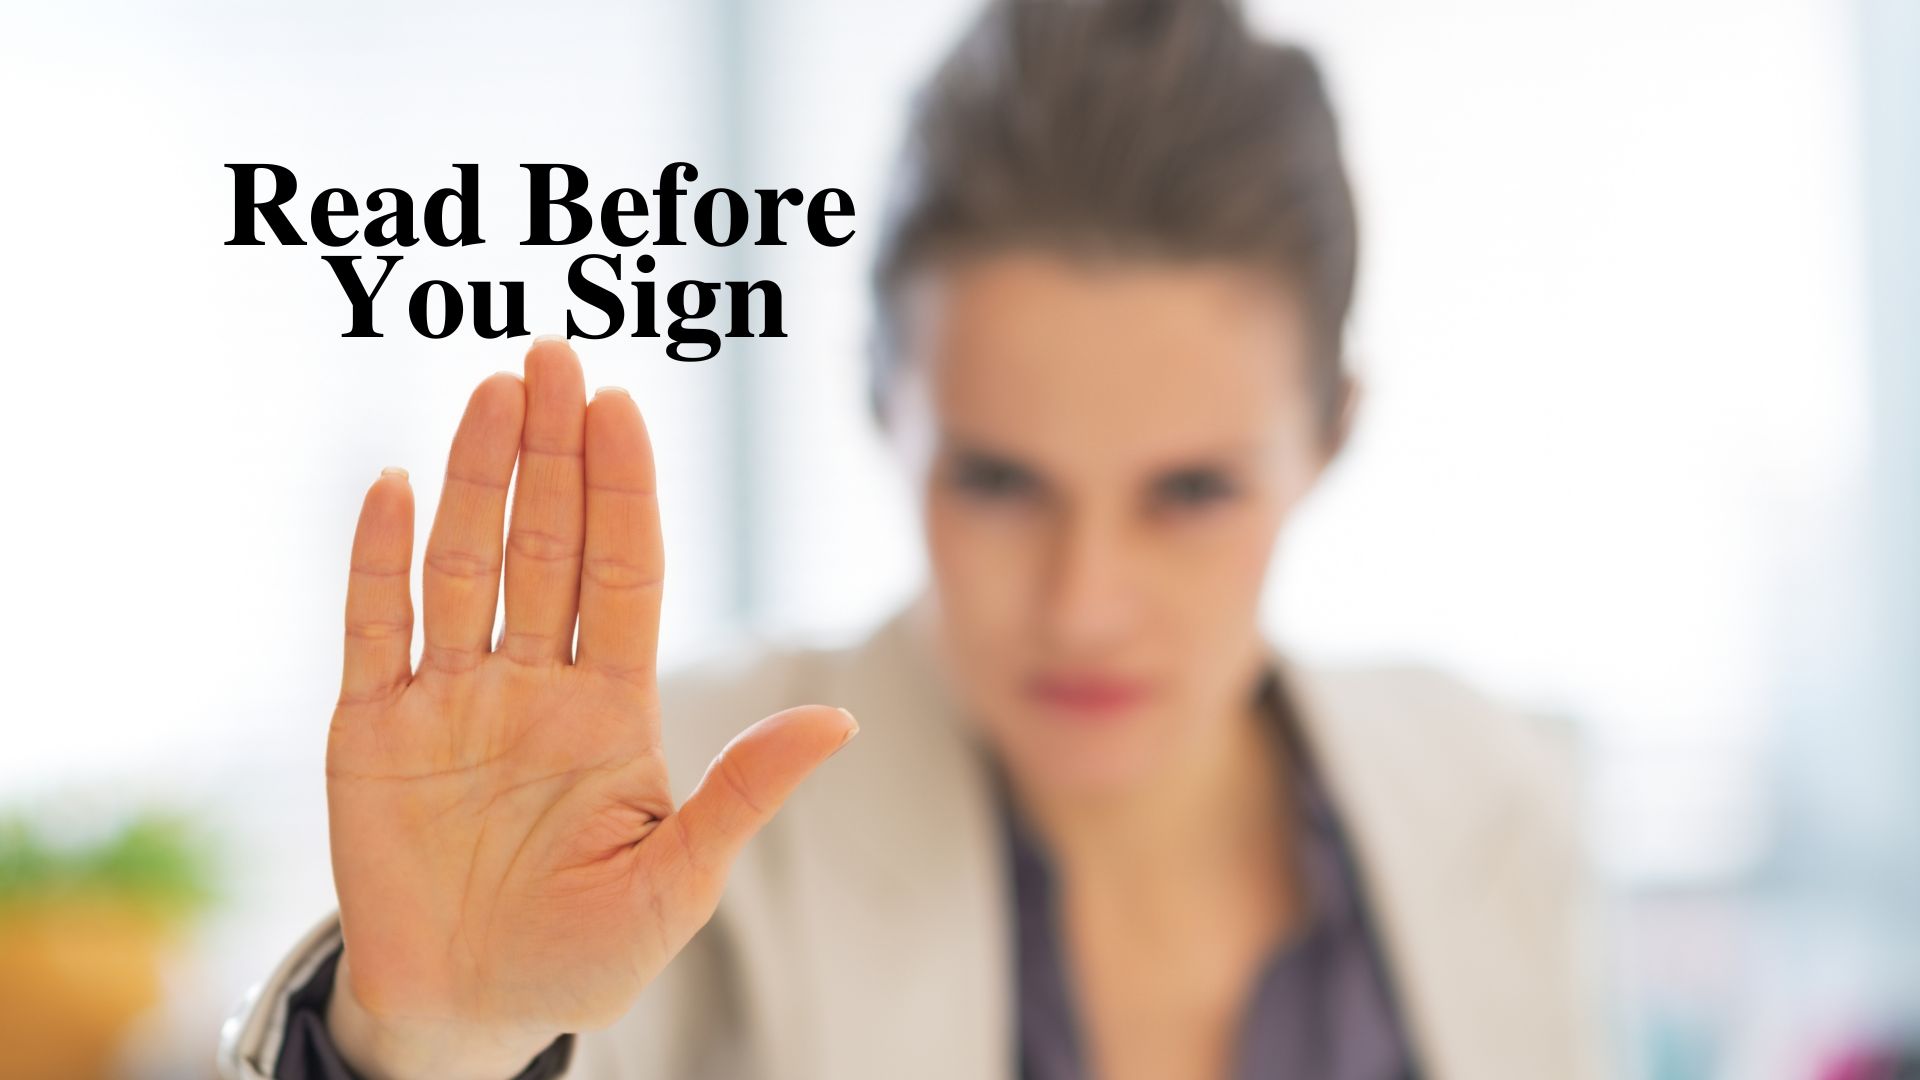 Read more you sign